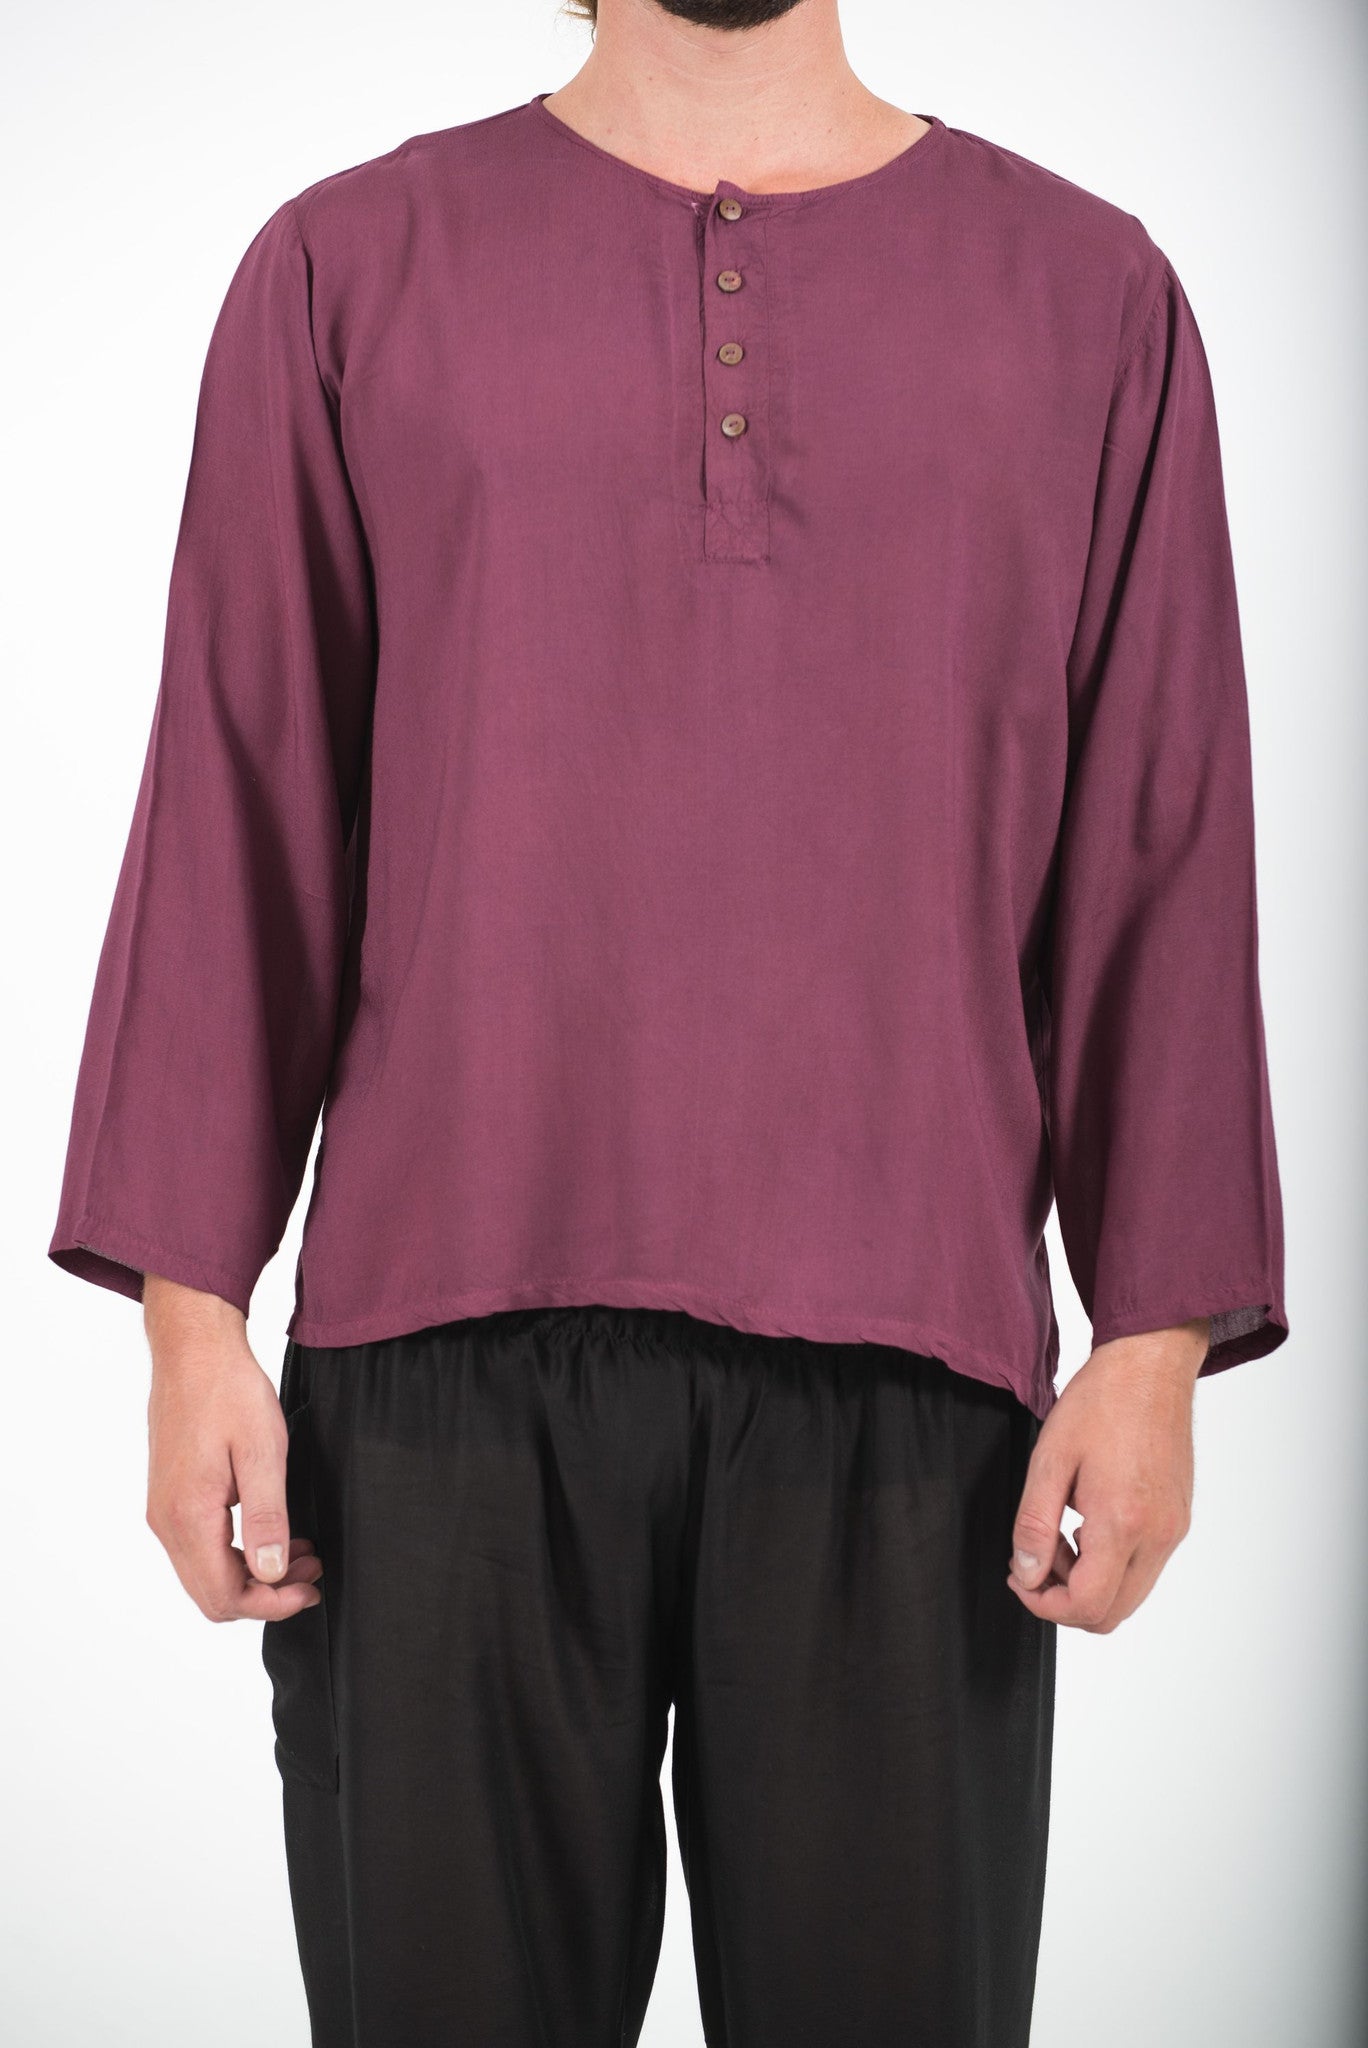 Mens Yoga Shirts No Collar with Coconut Buttons in Purple – Harem Pants